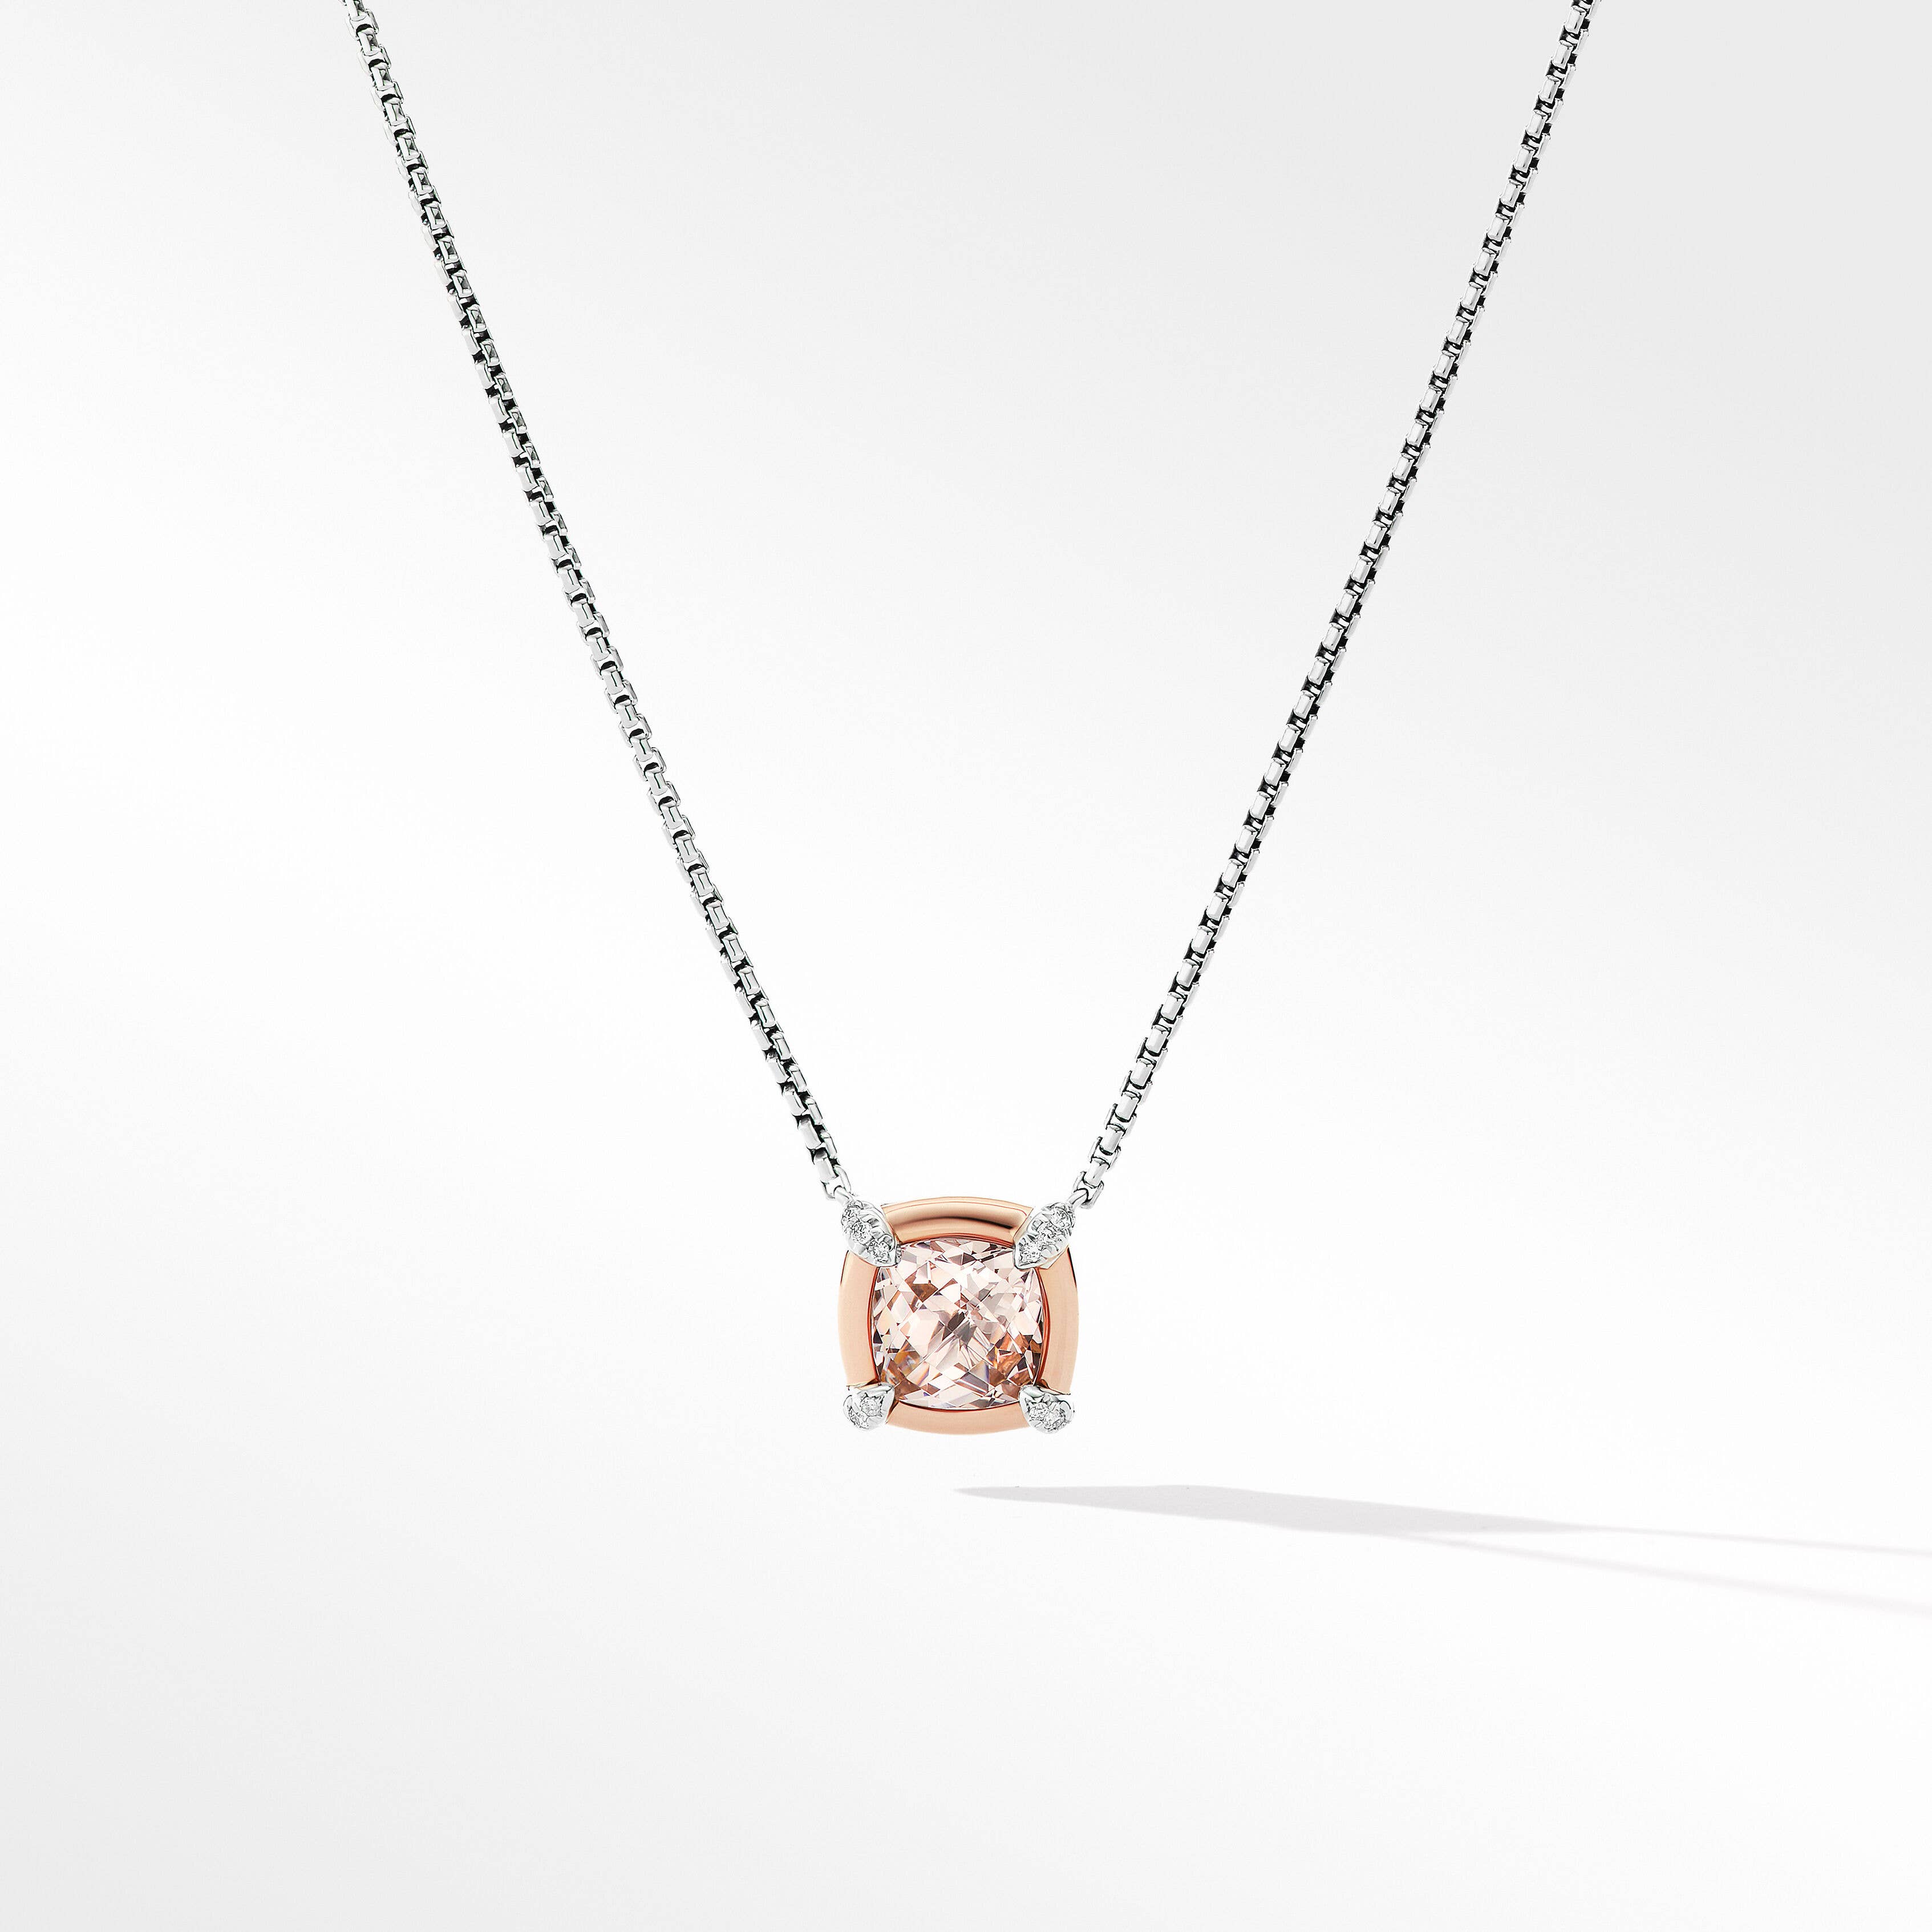 Petite Chatelaine® Pendant Necklace with Morganite, 18K Rose Gold and Pavé Diamonds